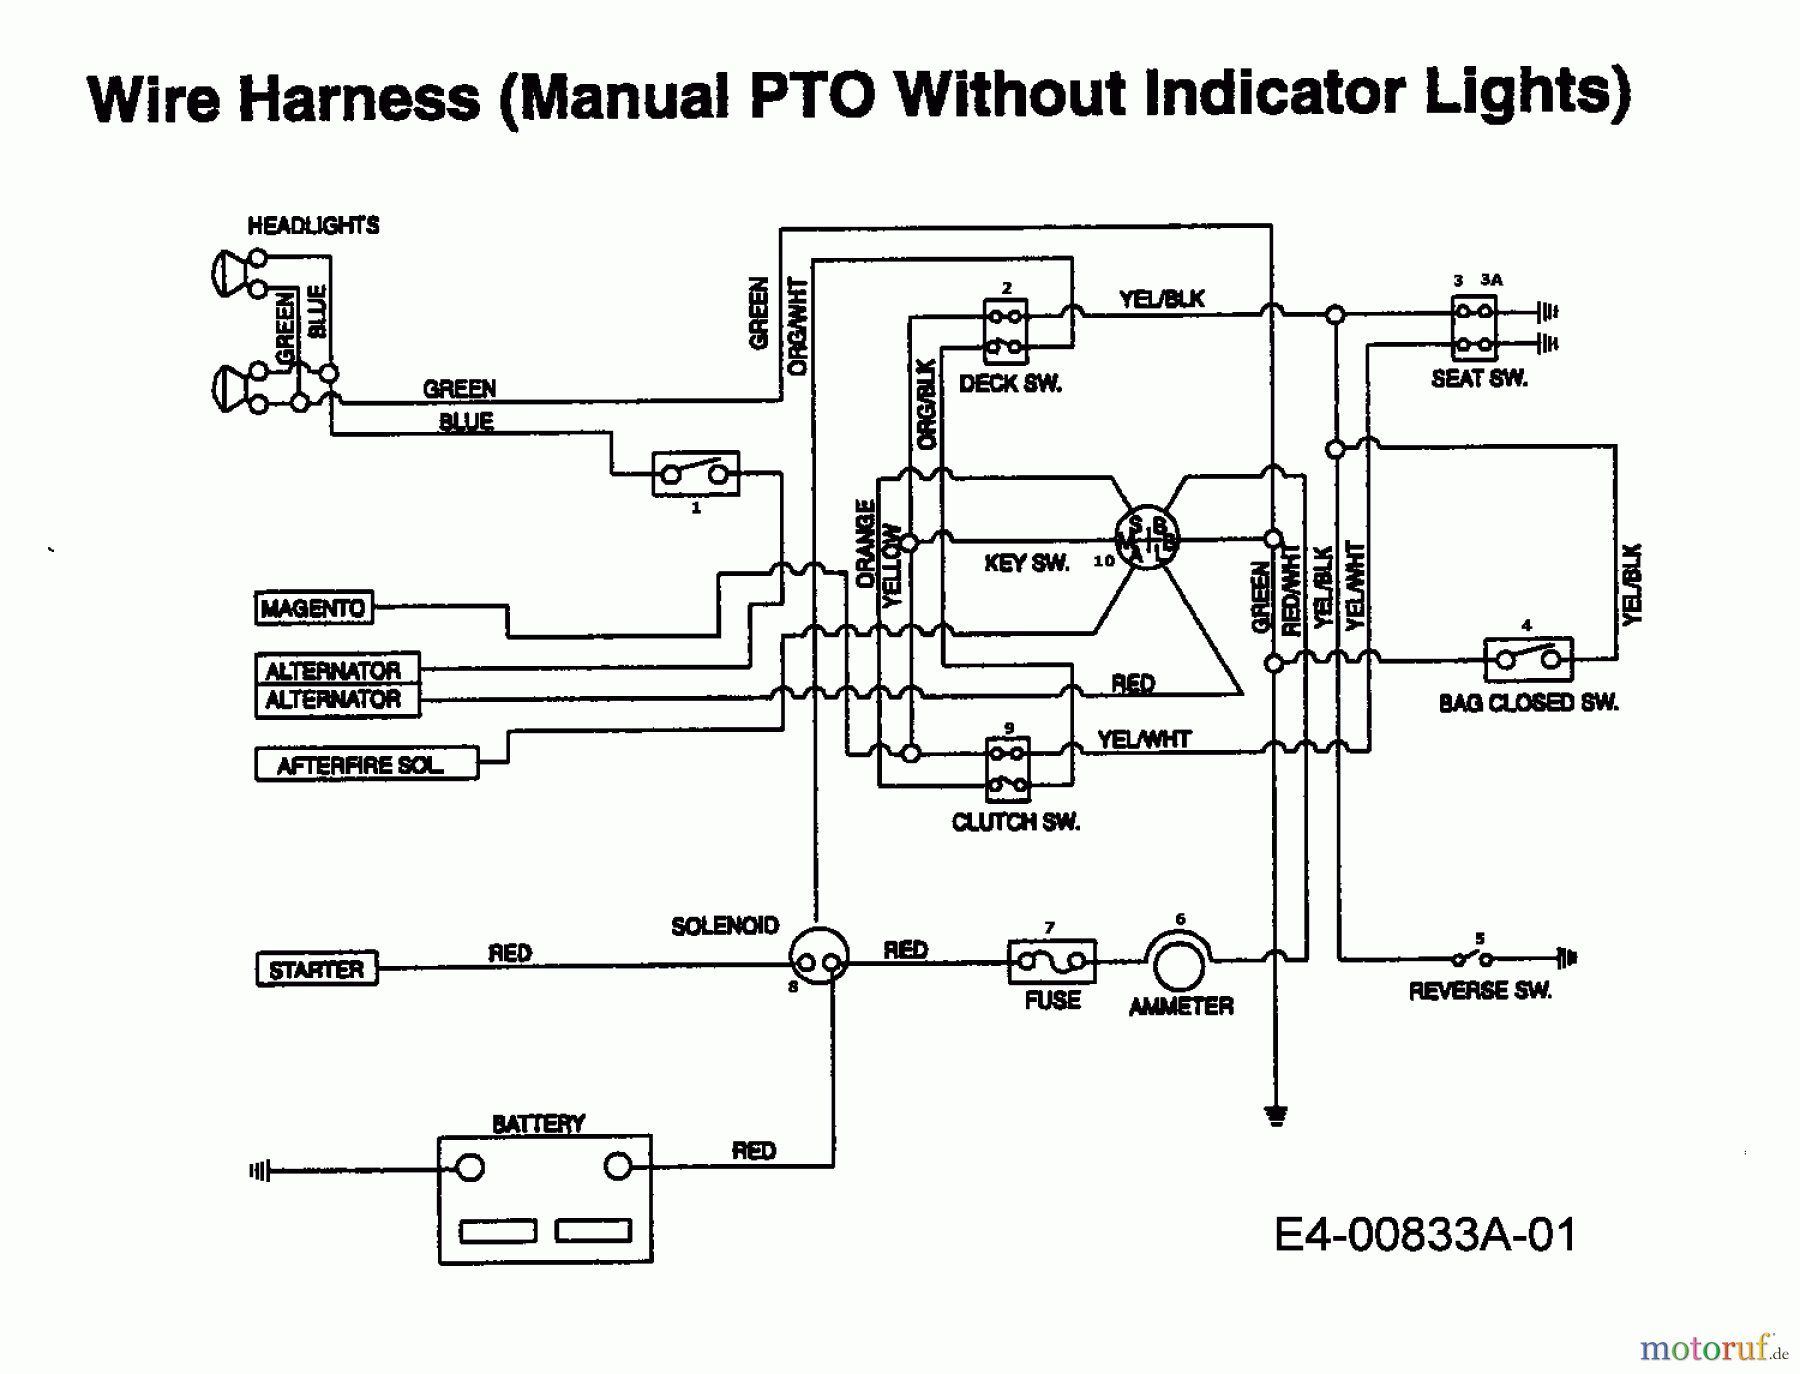  Raiffeisen Lawn tractors RMH 13-102 H 13AA793N628  (1998) Wiring diagram without indicator lights